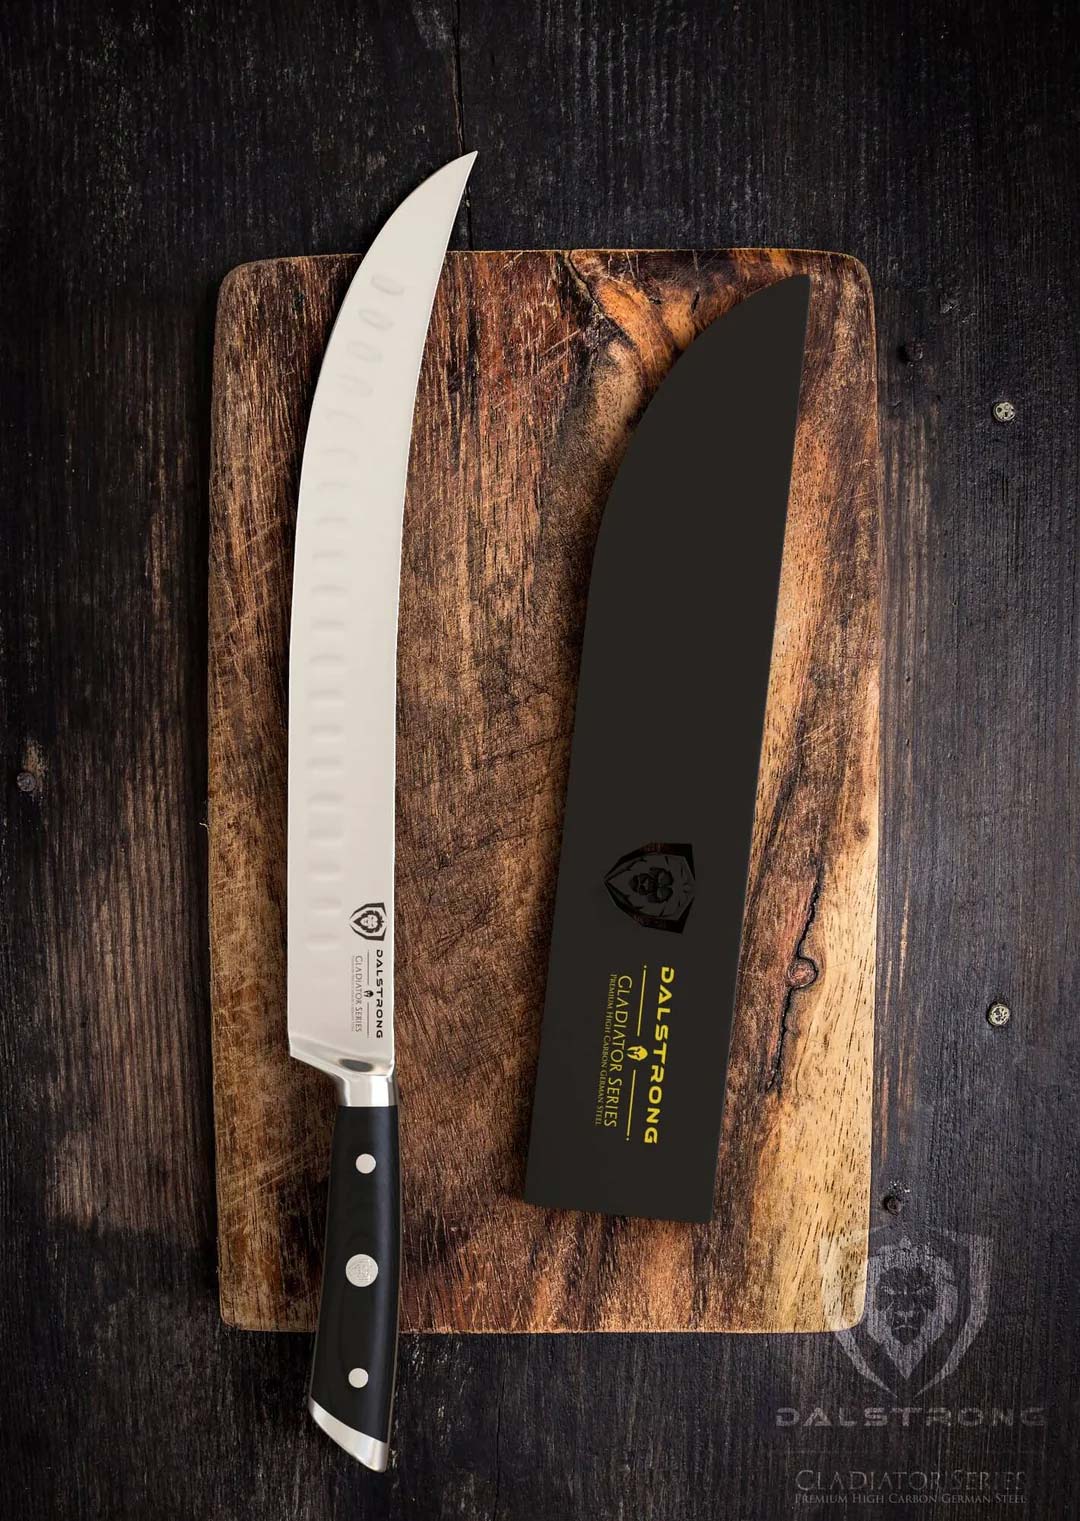 Dalstrong gladiator series 10 inch butcher knife with black handle and sheath on top of a wooden cutting board.